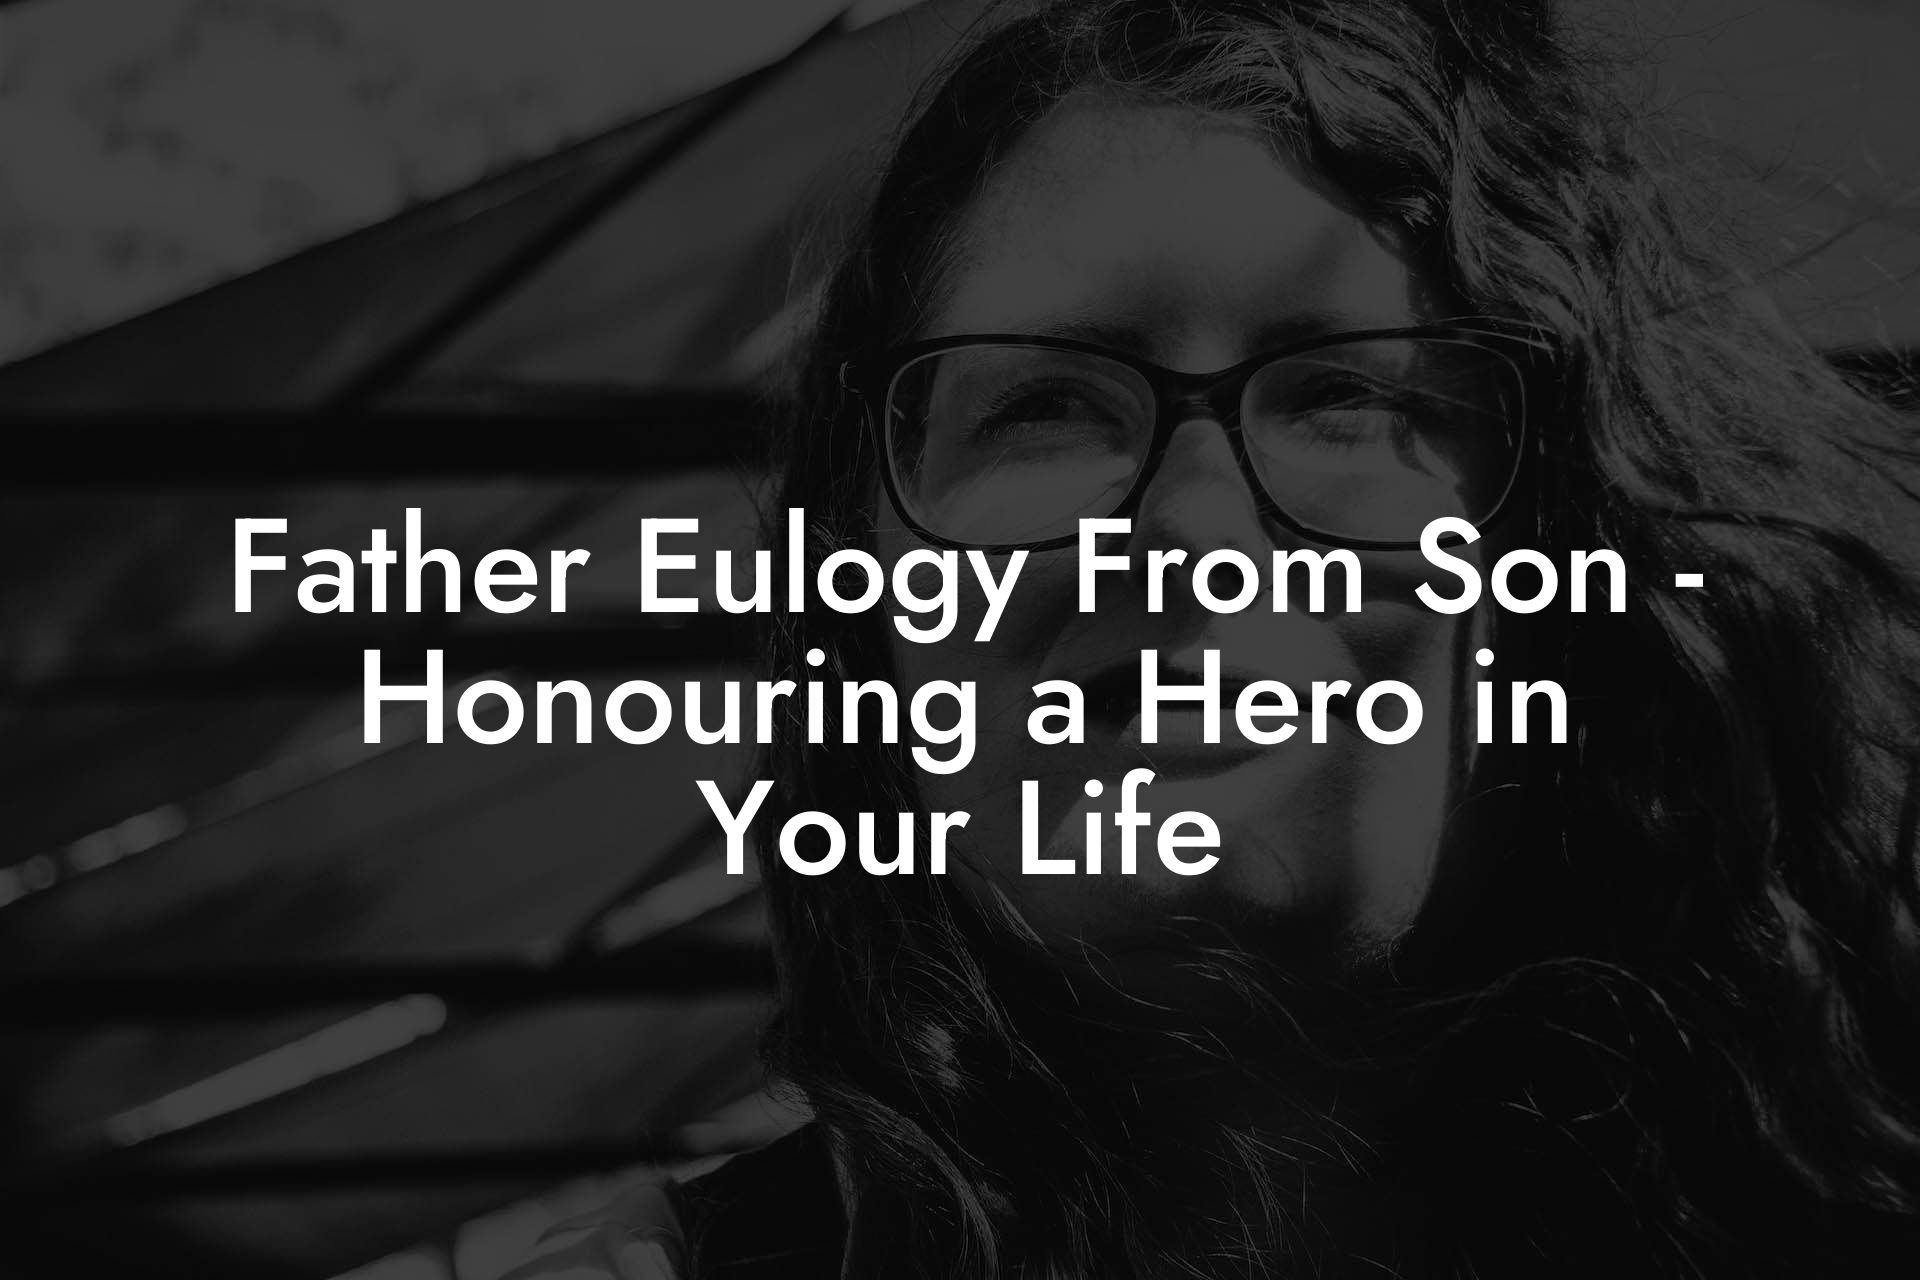 Father Eulogy From Son - Honouring a Hero in Your Life